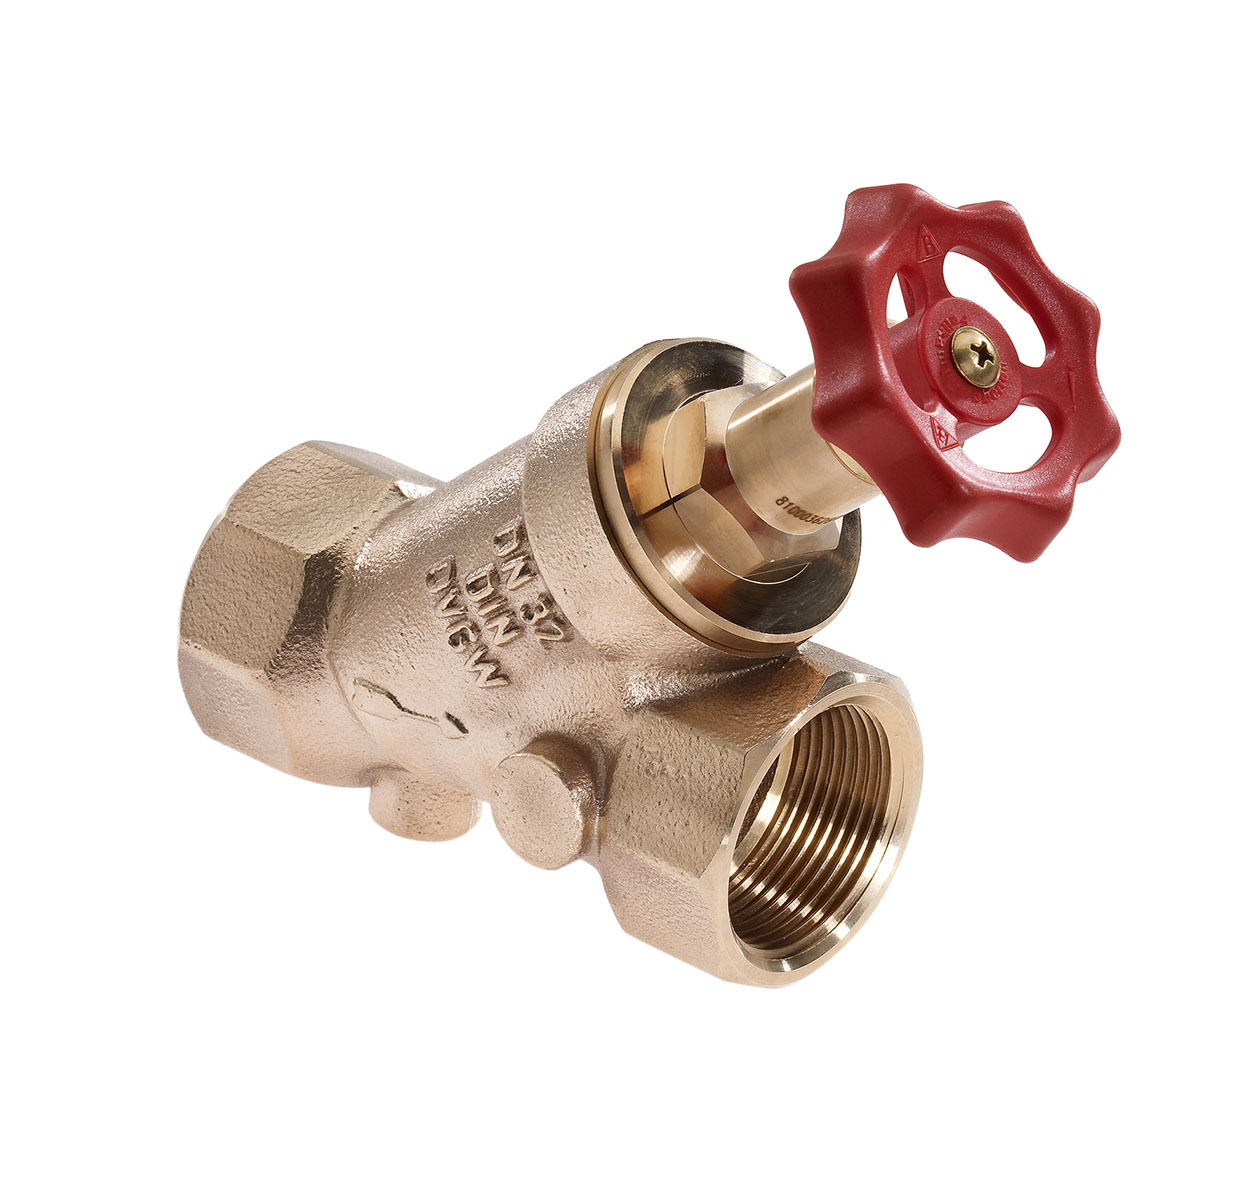 3501205 - Red-brass Free-flow valve with plugs on both sides, female thread, without drain valve